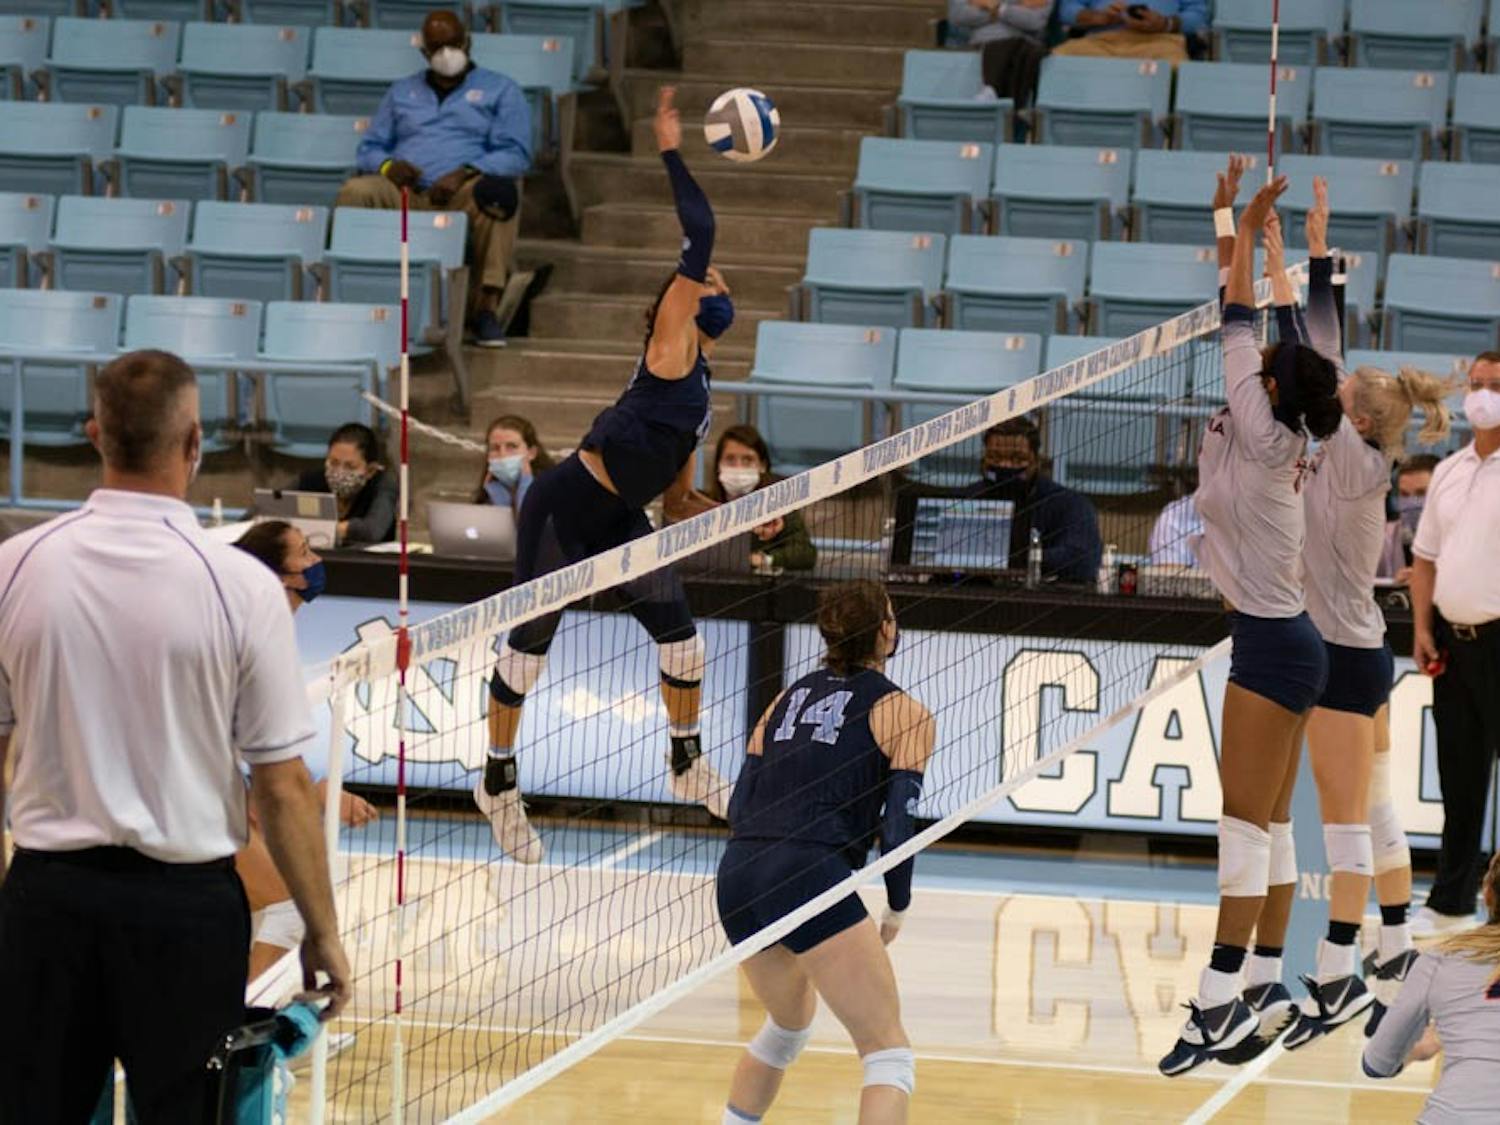 UNC sophomore outside hitter Carly Peck (13) strikes the ball during a set against Virginia during a game against the University of Virginia in Carmichael Arena on Sunday, Nov. 1, 2020. UNC finished their season that night with A 3-1 win.